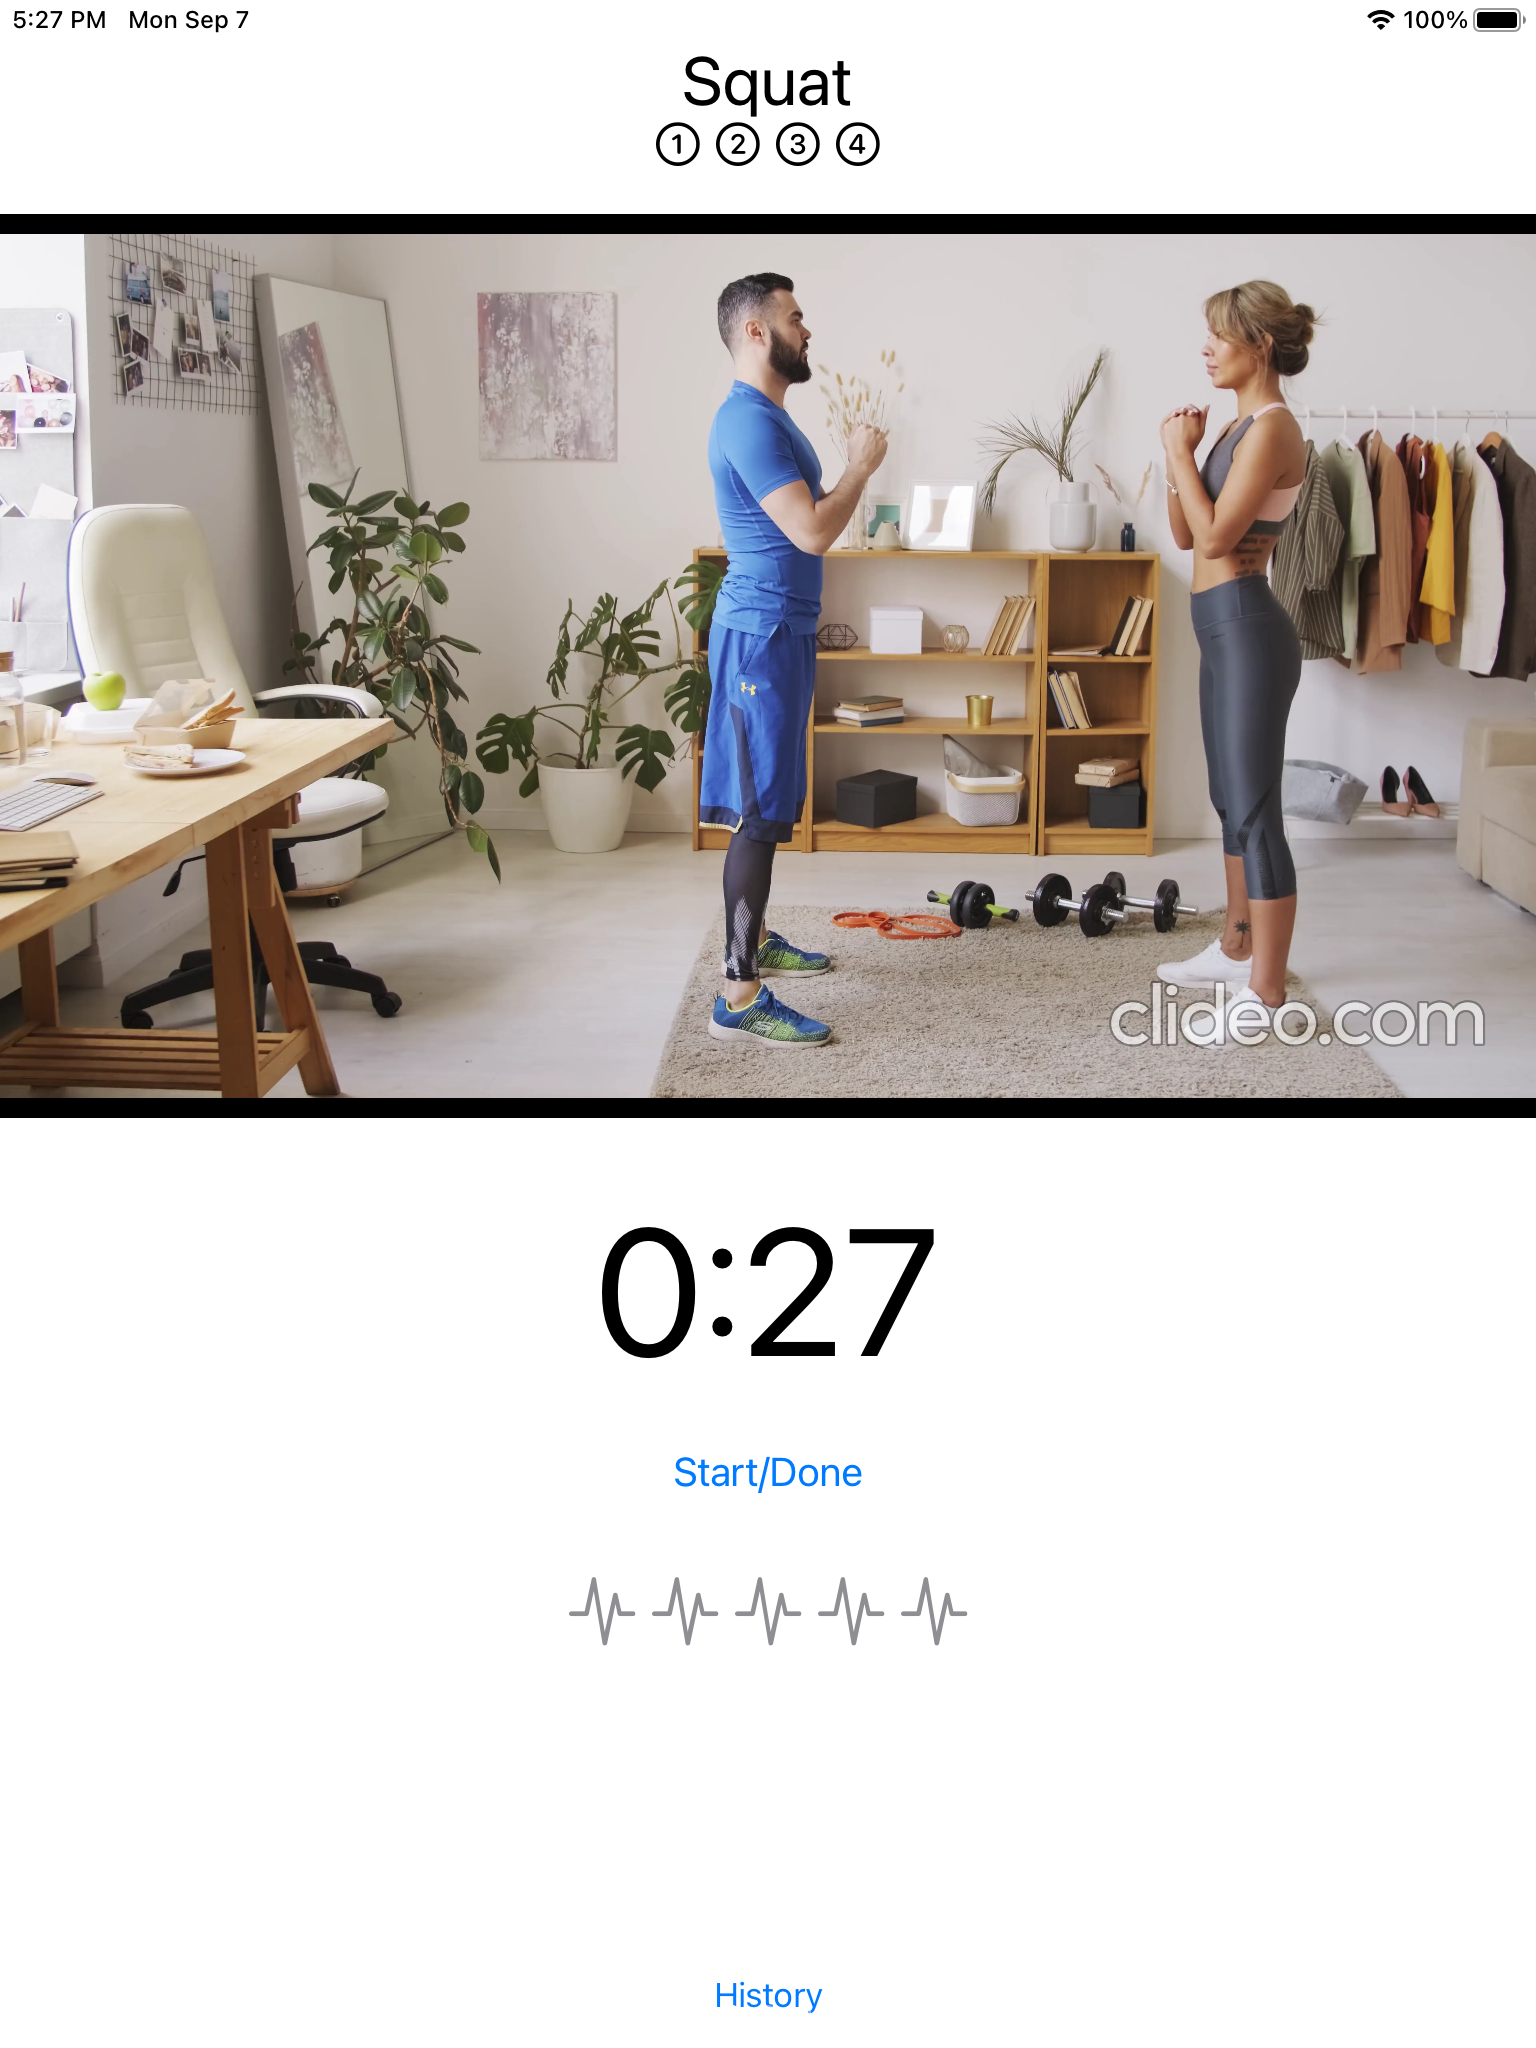 Exercise view with Rating subview